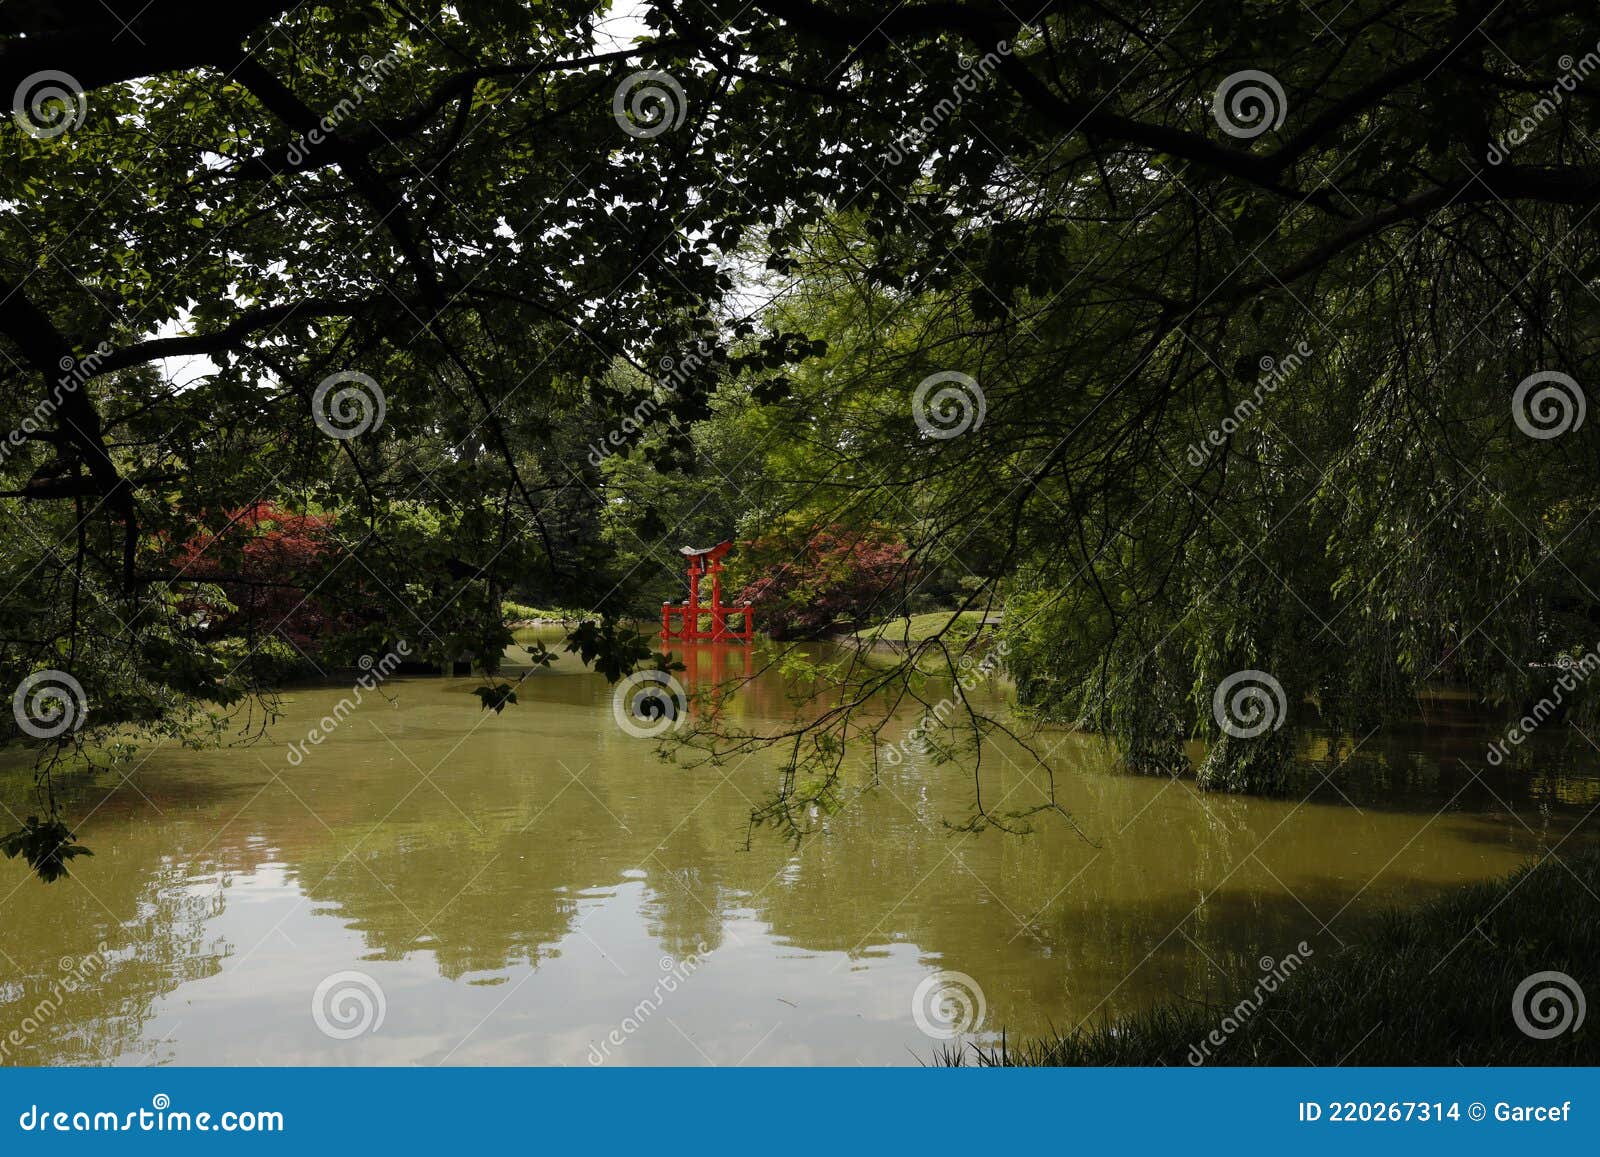 Pond with Trees and a Japanese Gate Stock Photo - Image of pond, park ...